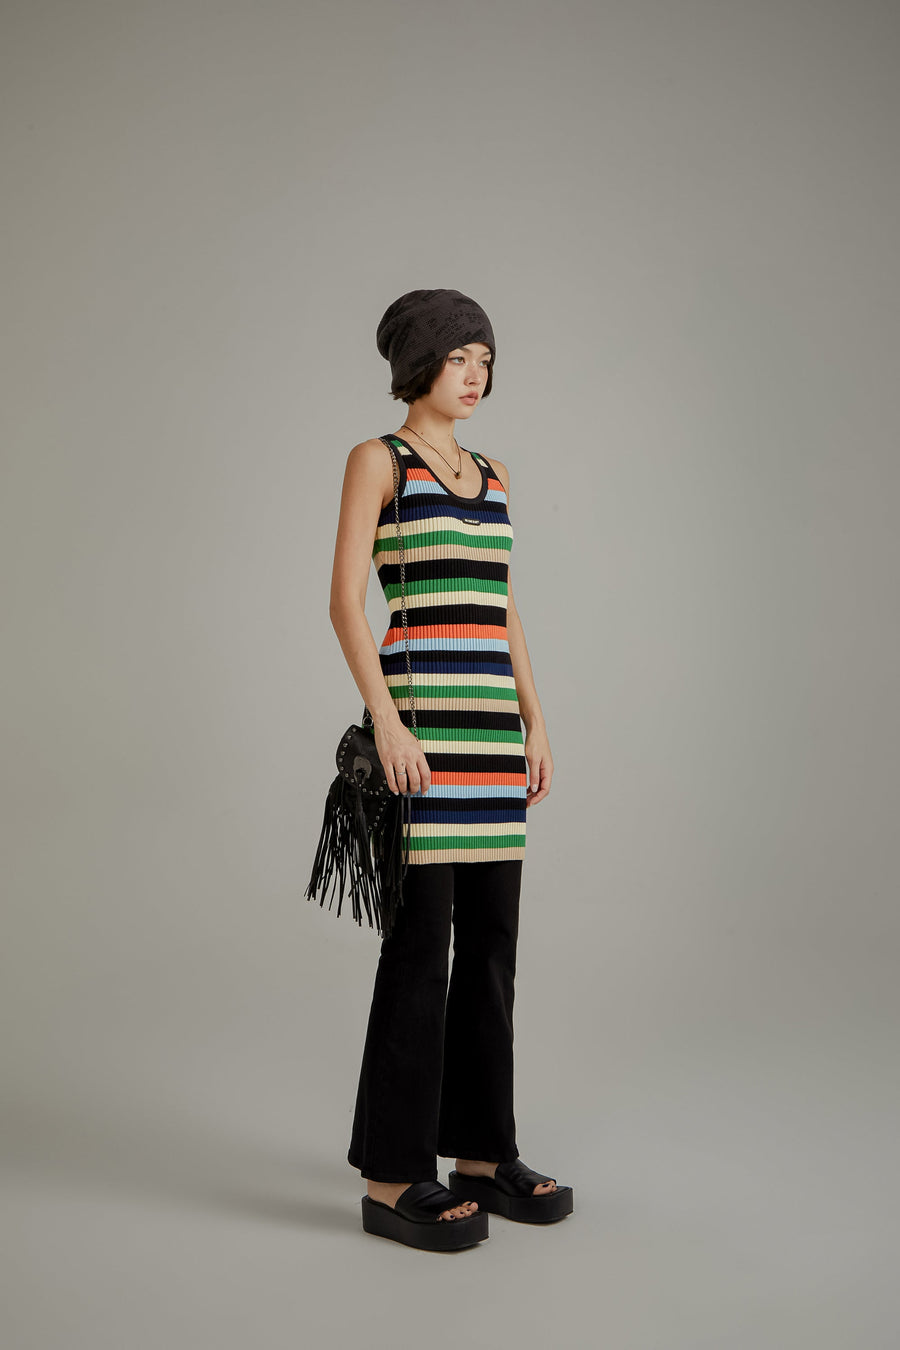 Color Contrast Striped Sleeveless Knit Dress